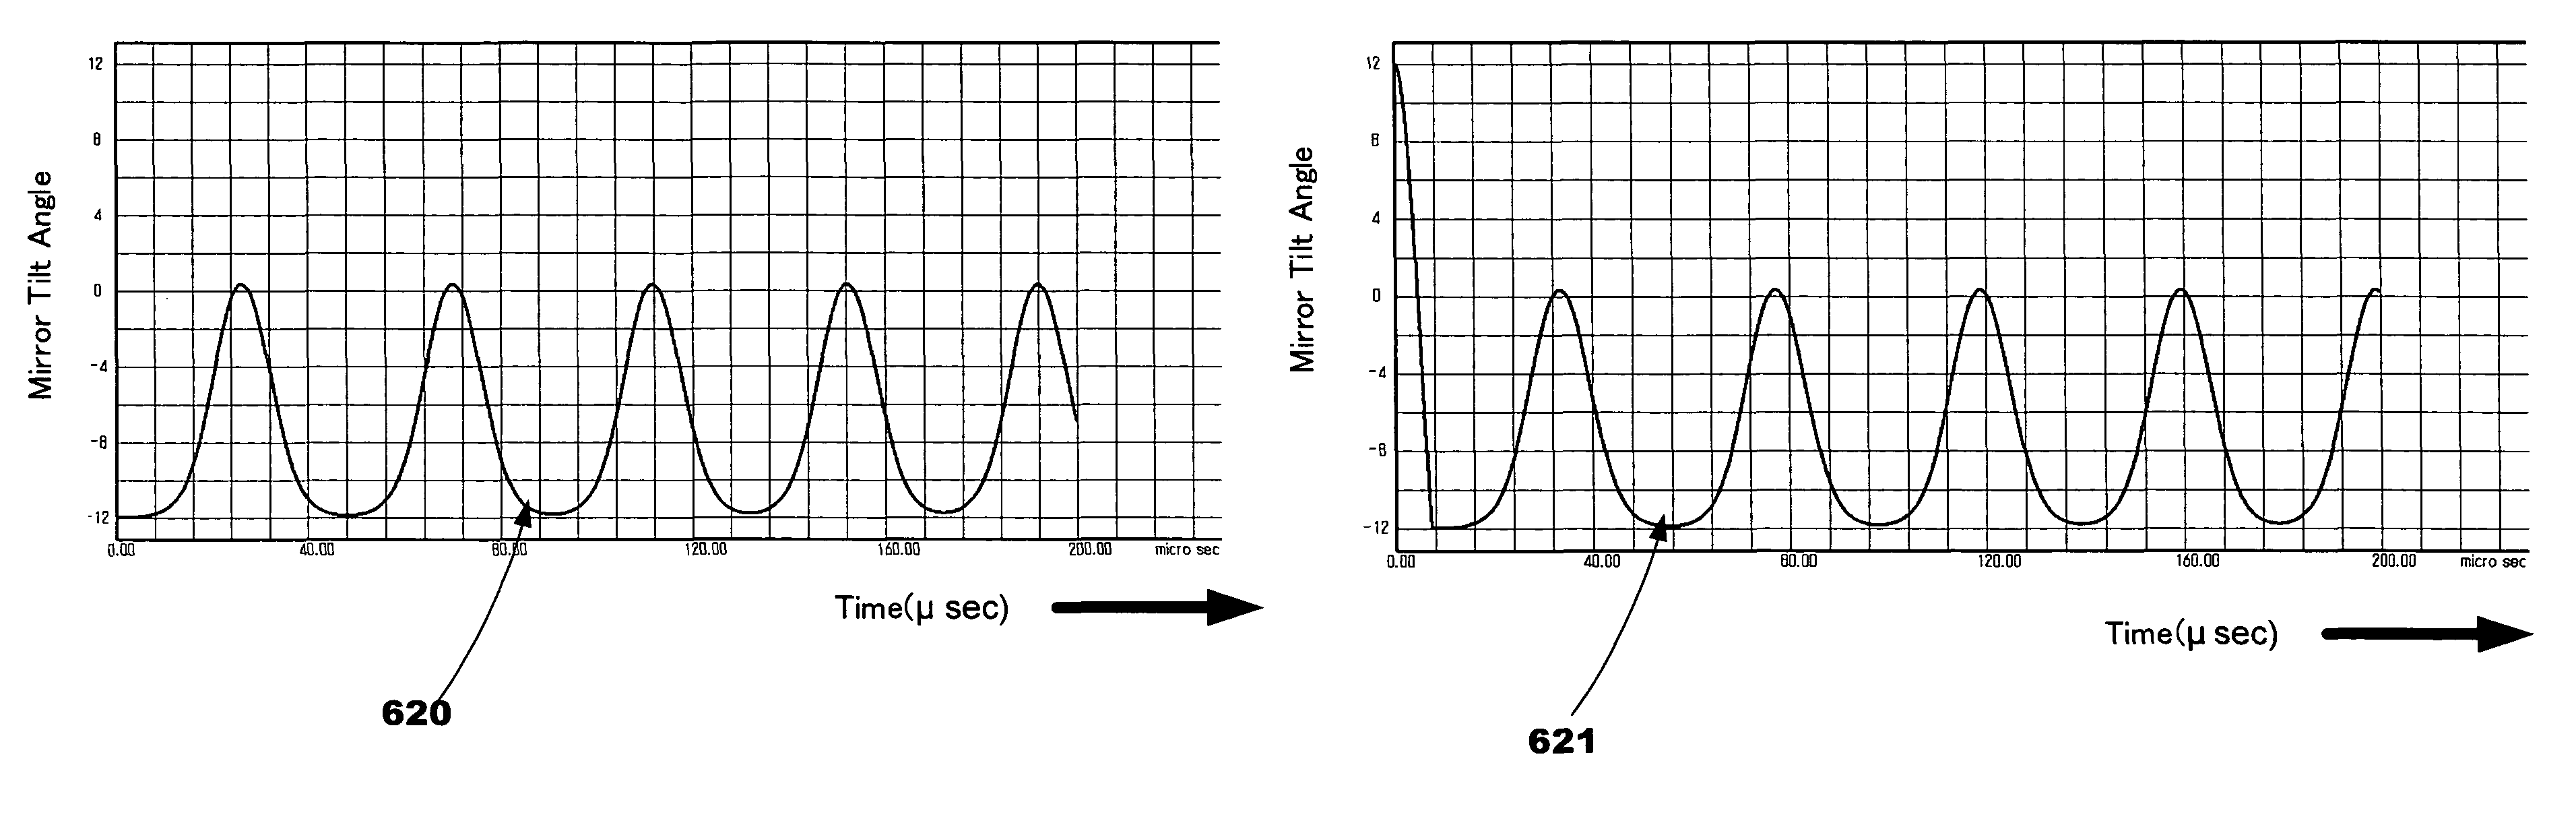 Analog micromirror devices with continuous intermediate states